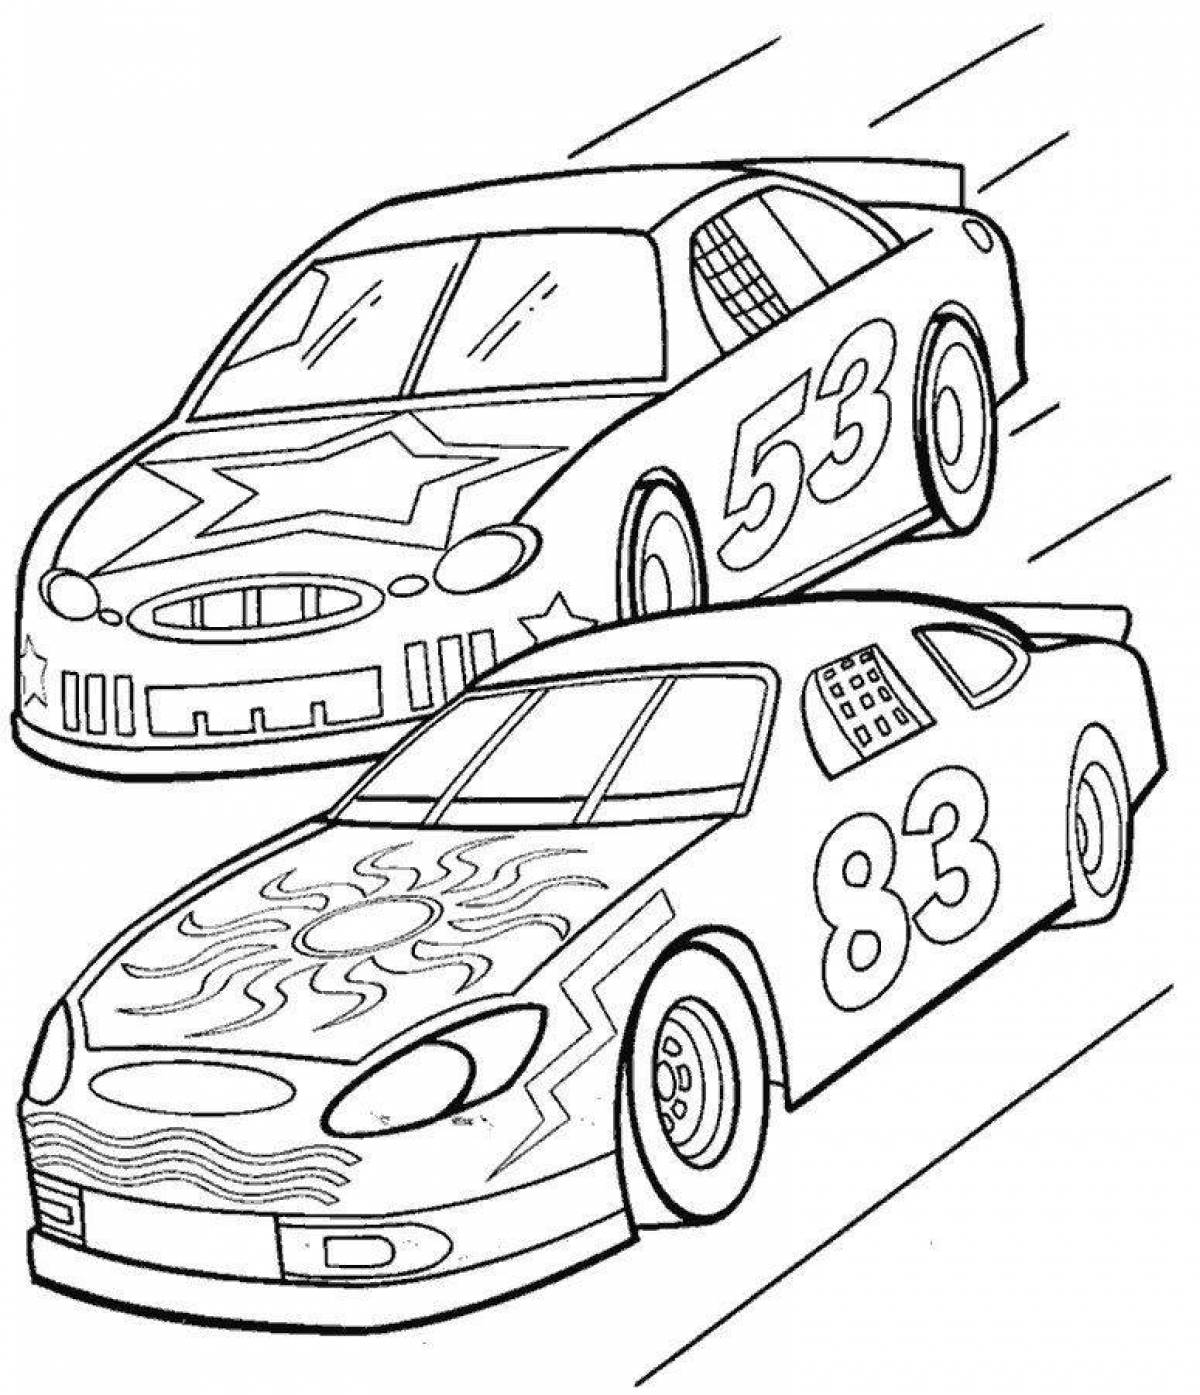 Coloring pages for boys 8 years old